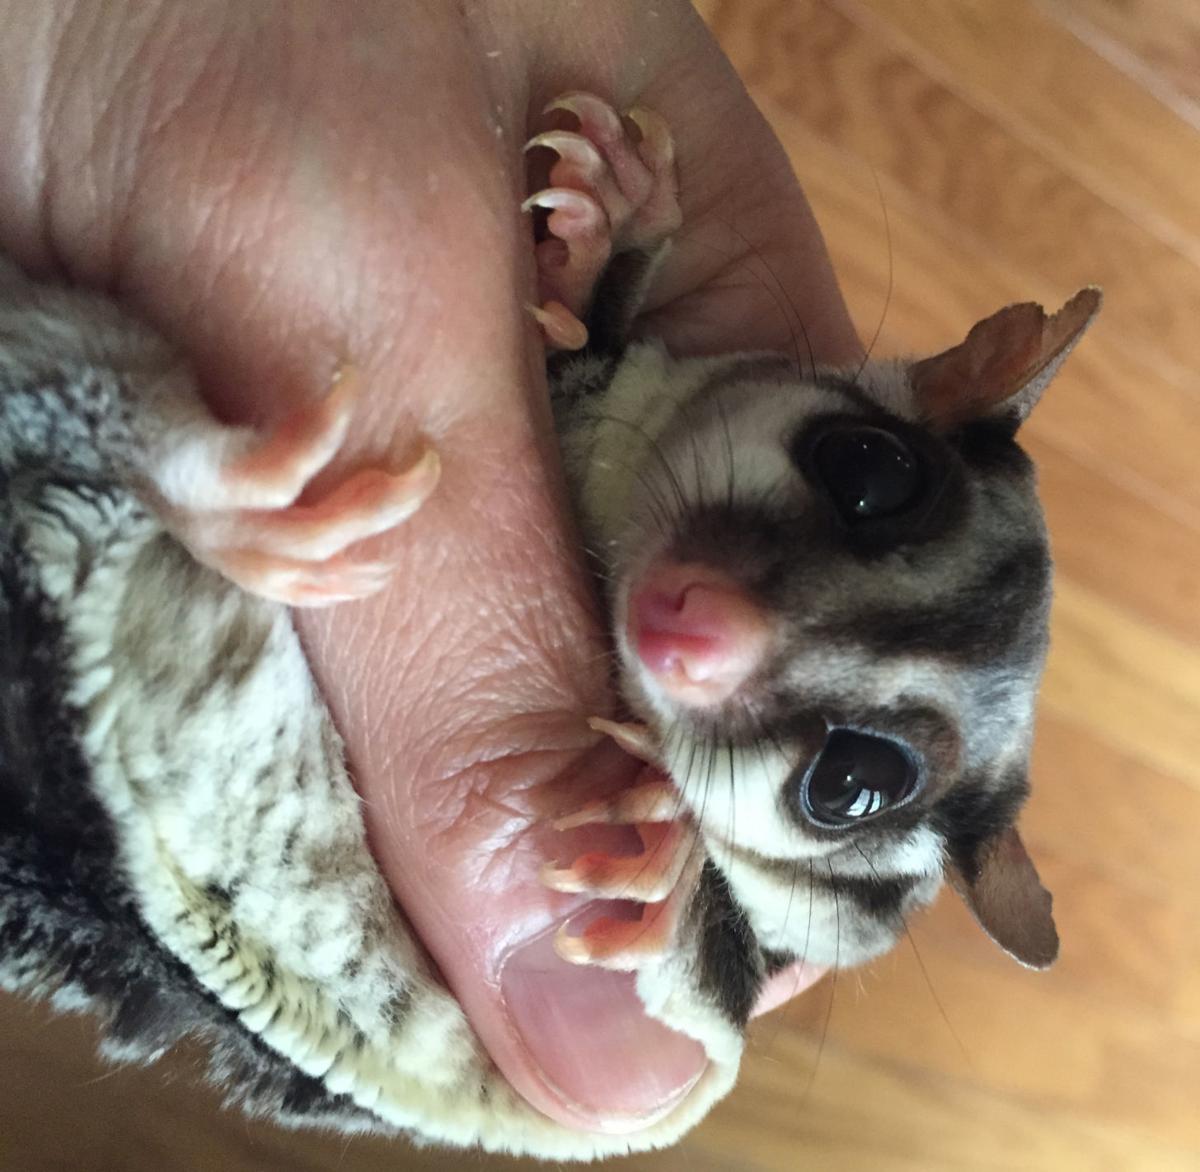 Sugar Gliders a low maintenance, interactive pet | Special Sections